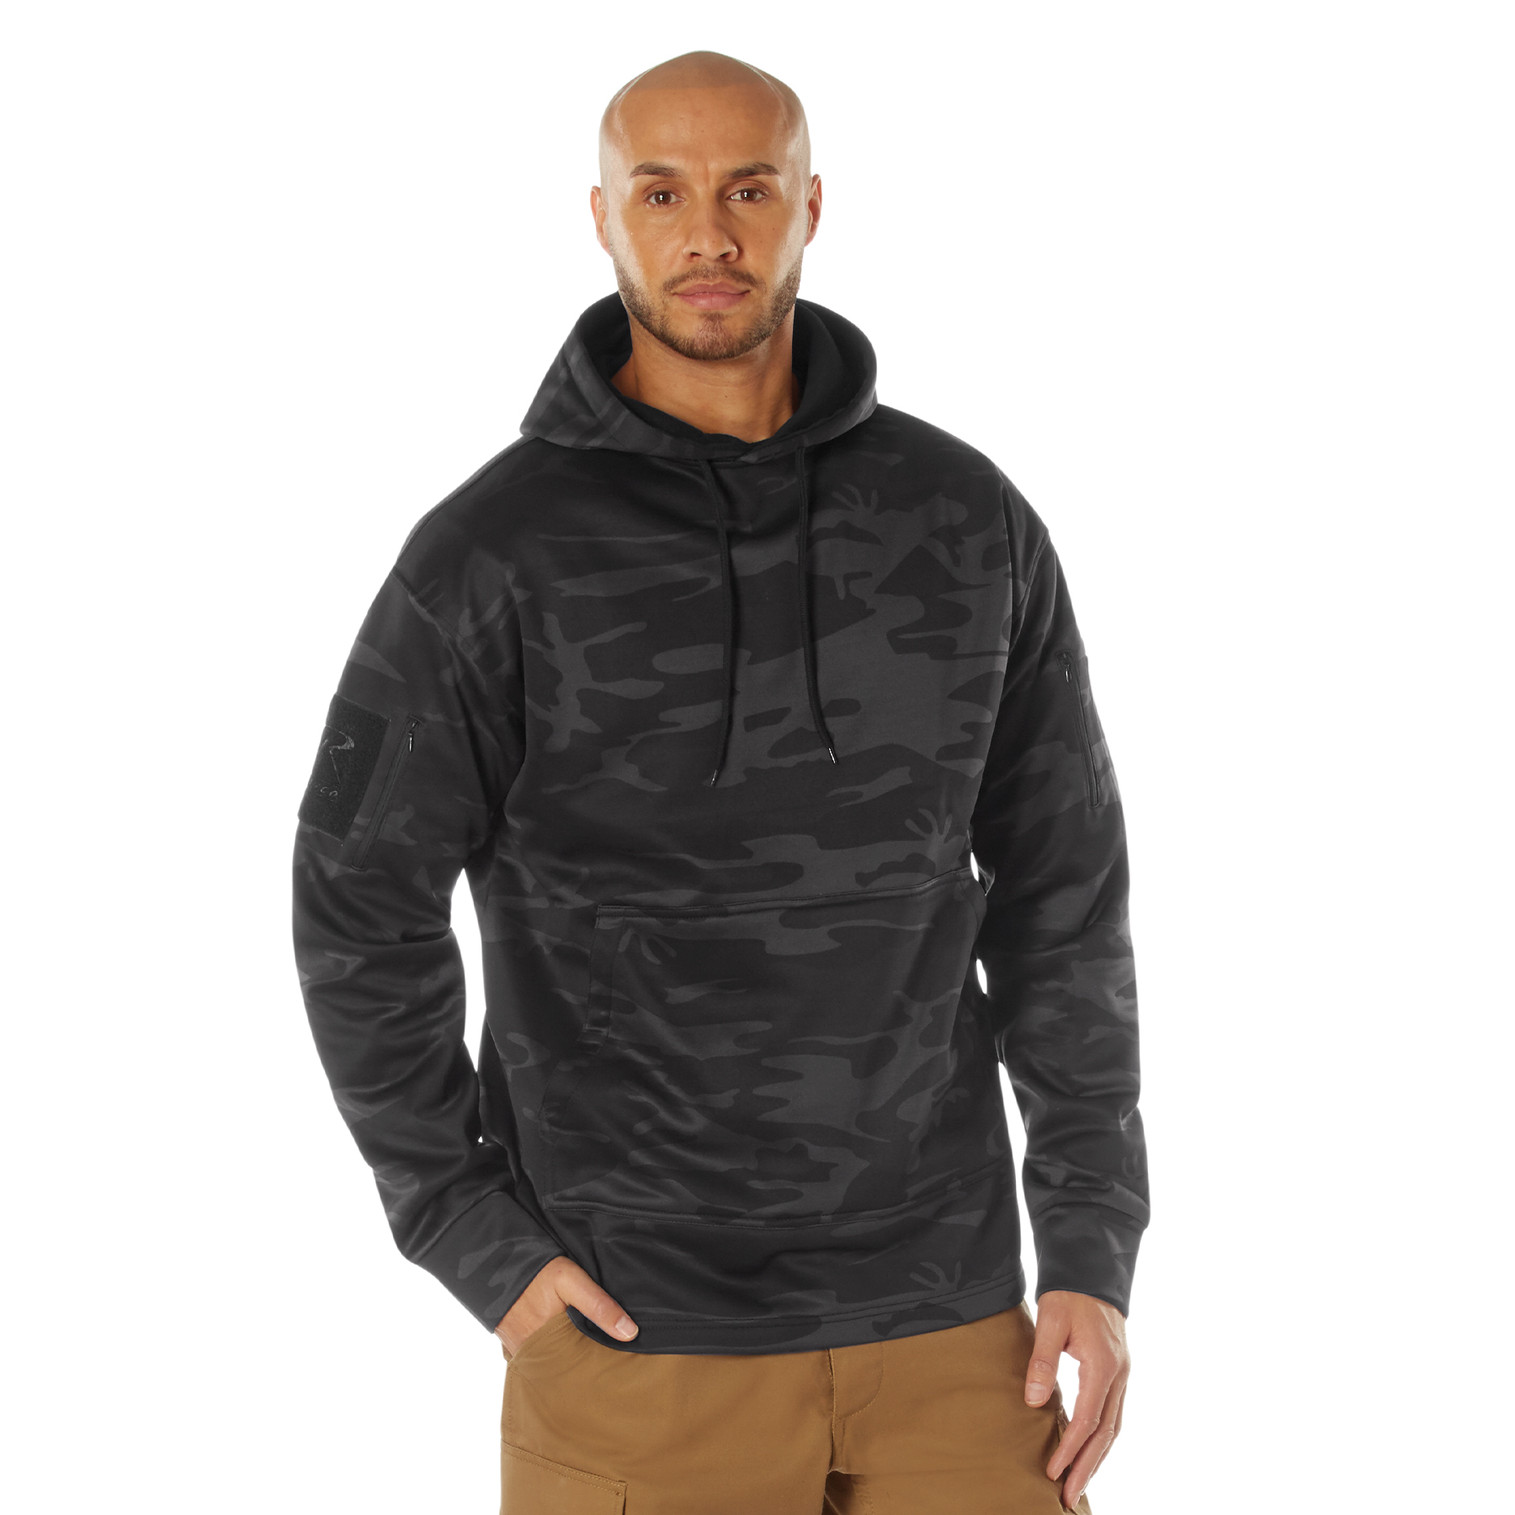 Rothco Concealed Carry Midnight Camo Hoodie - Midnight Black Camo